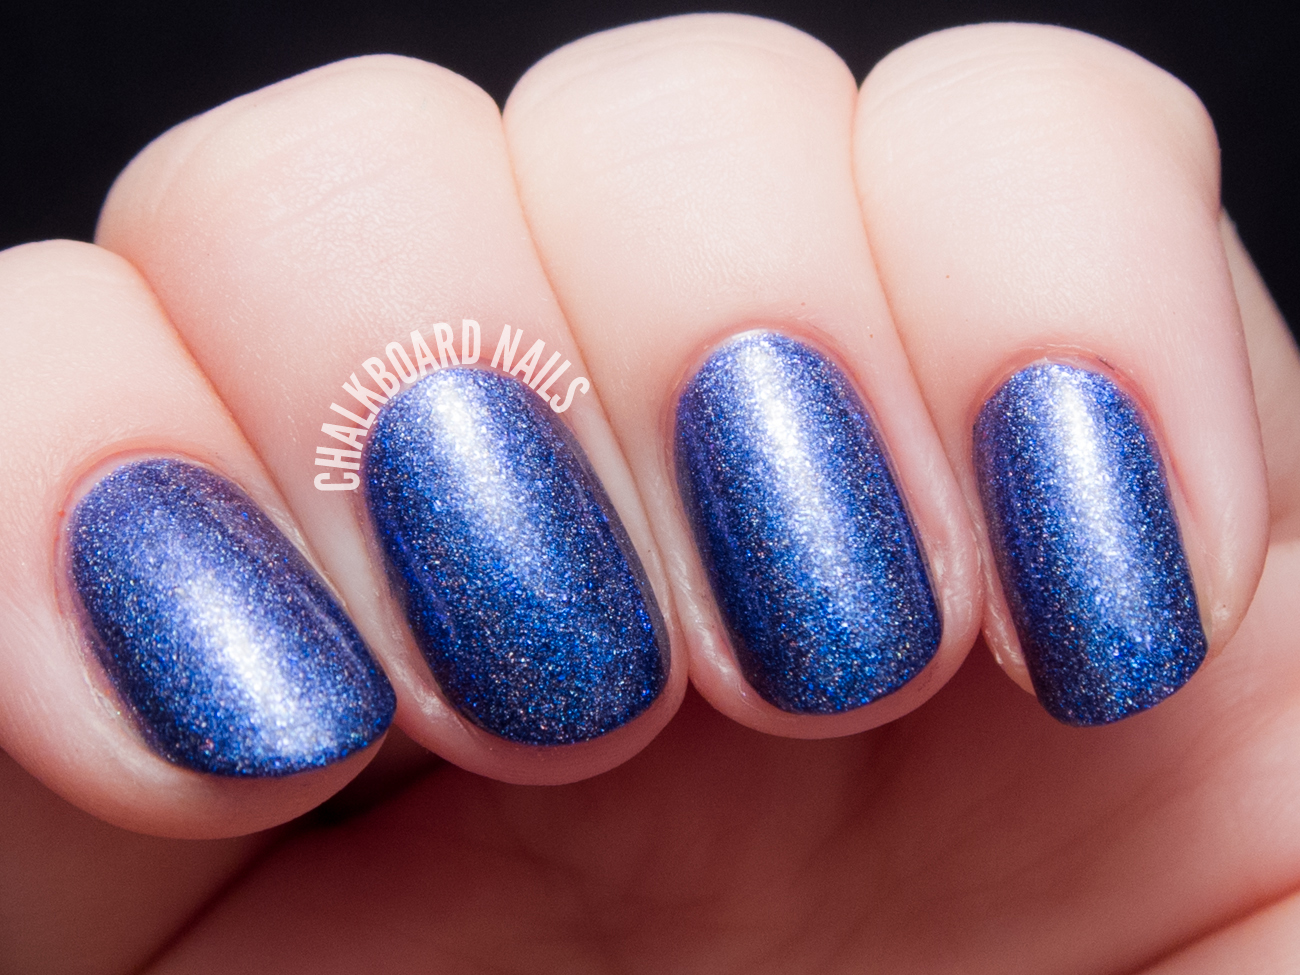 Glam Polish Second Star to the Right via @chalkboardnails